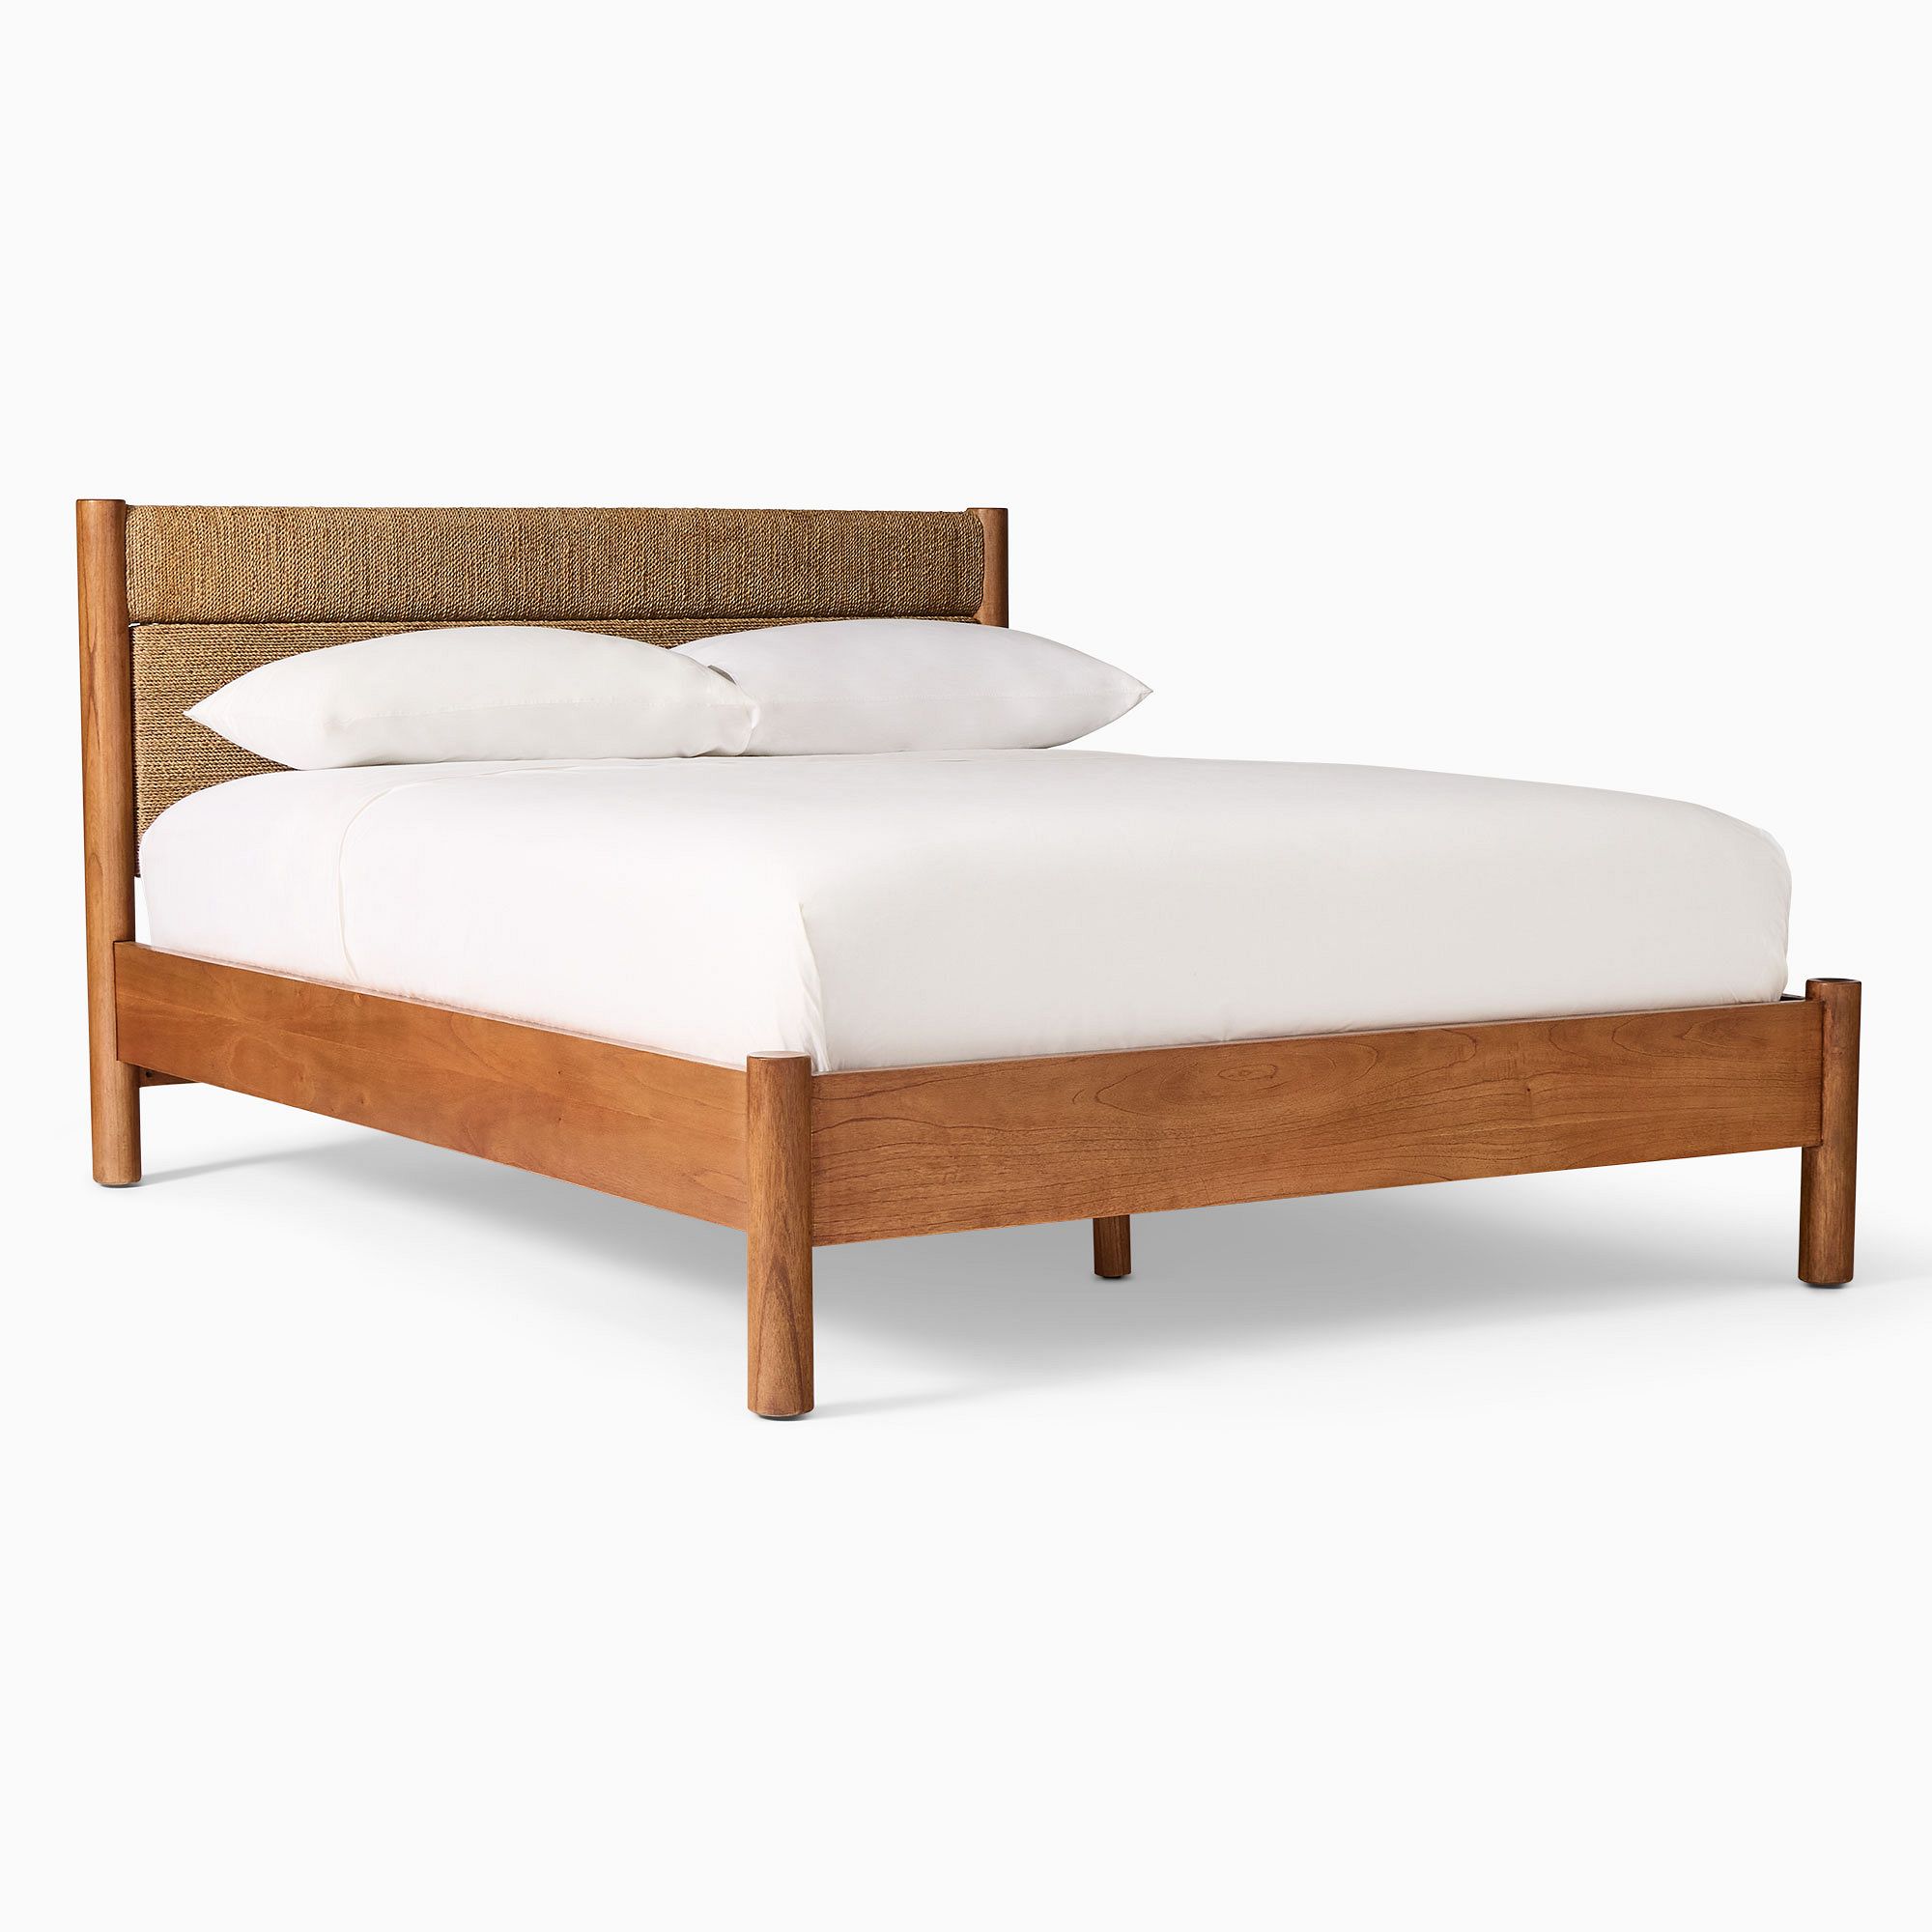 Mylos Woven & Wood Bed | West Elm